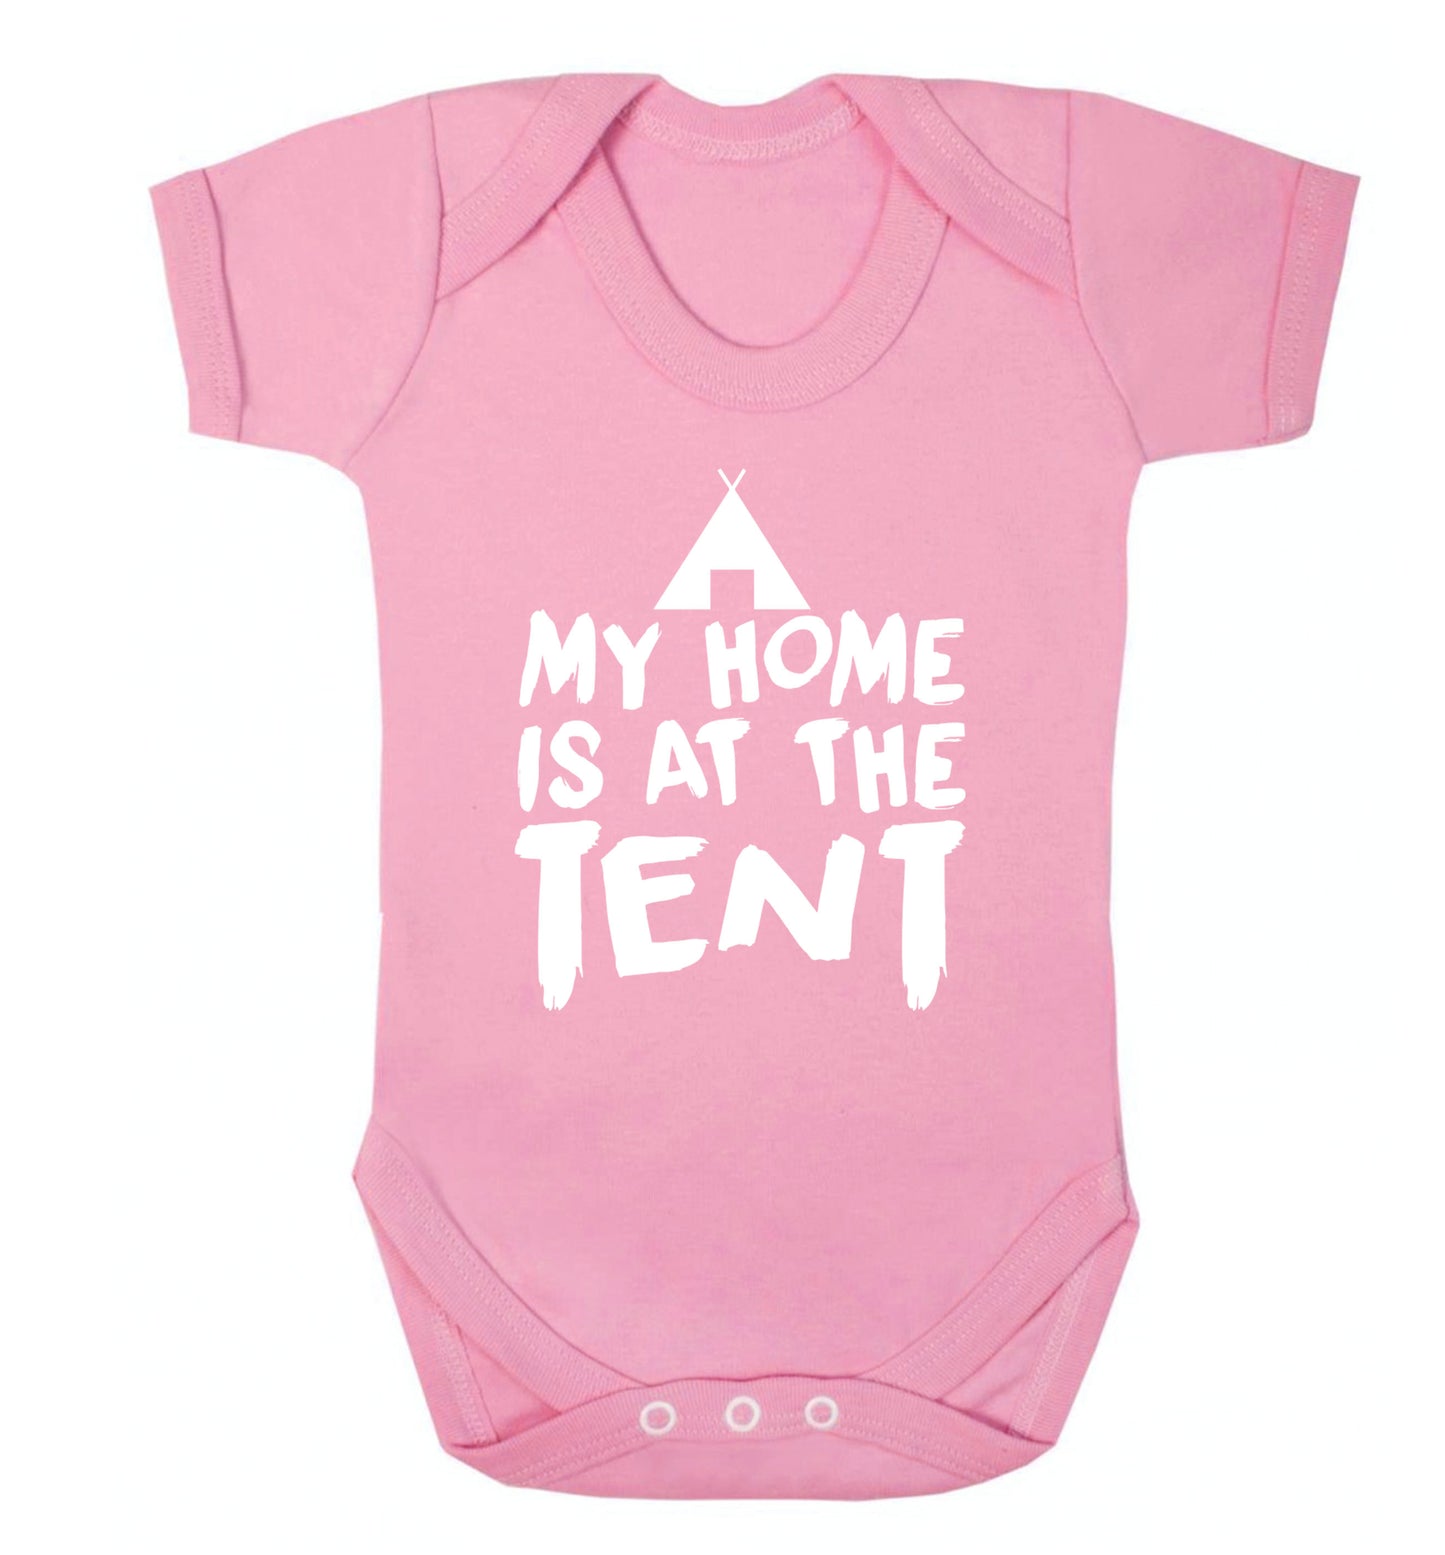 My home is at the tent Baby Vest pale pink 18-24 months